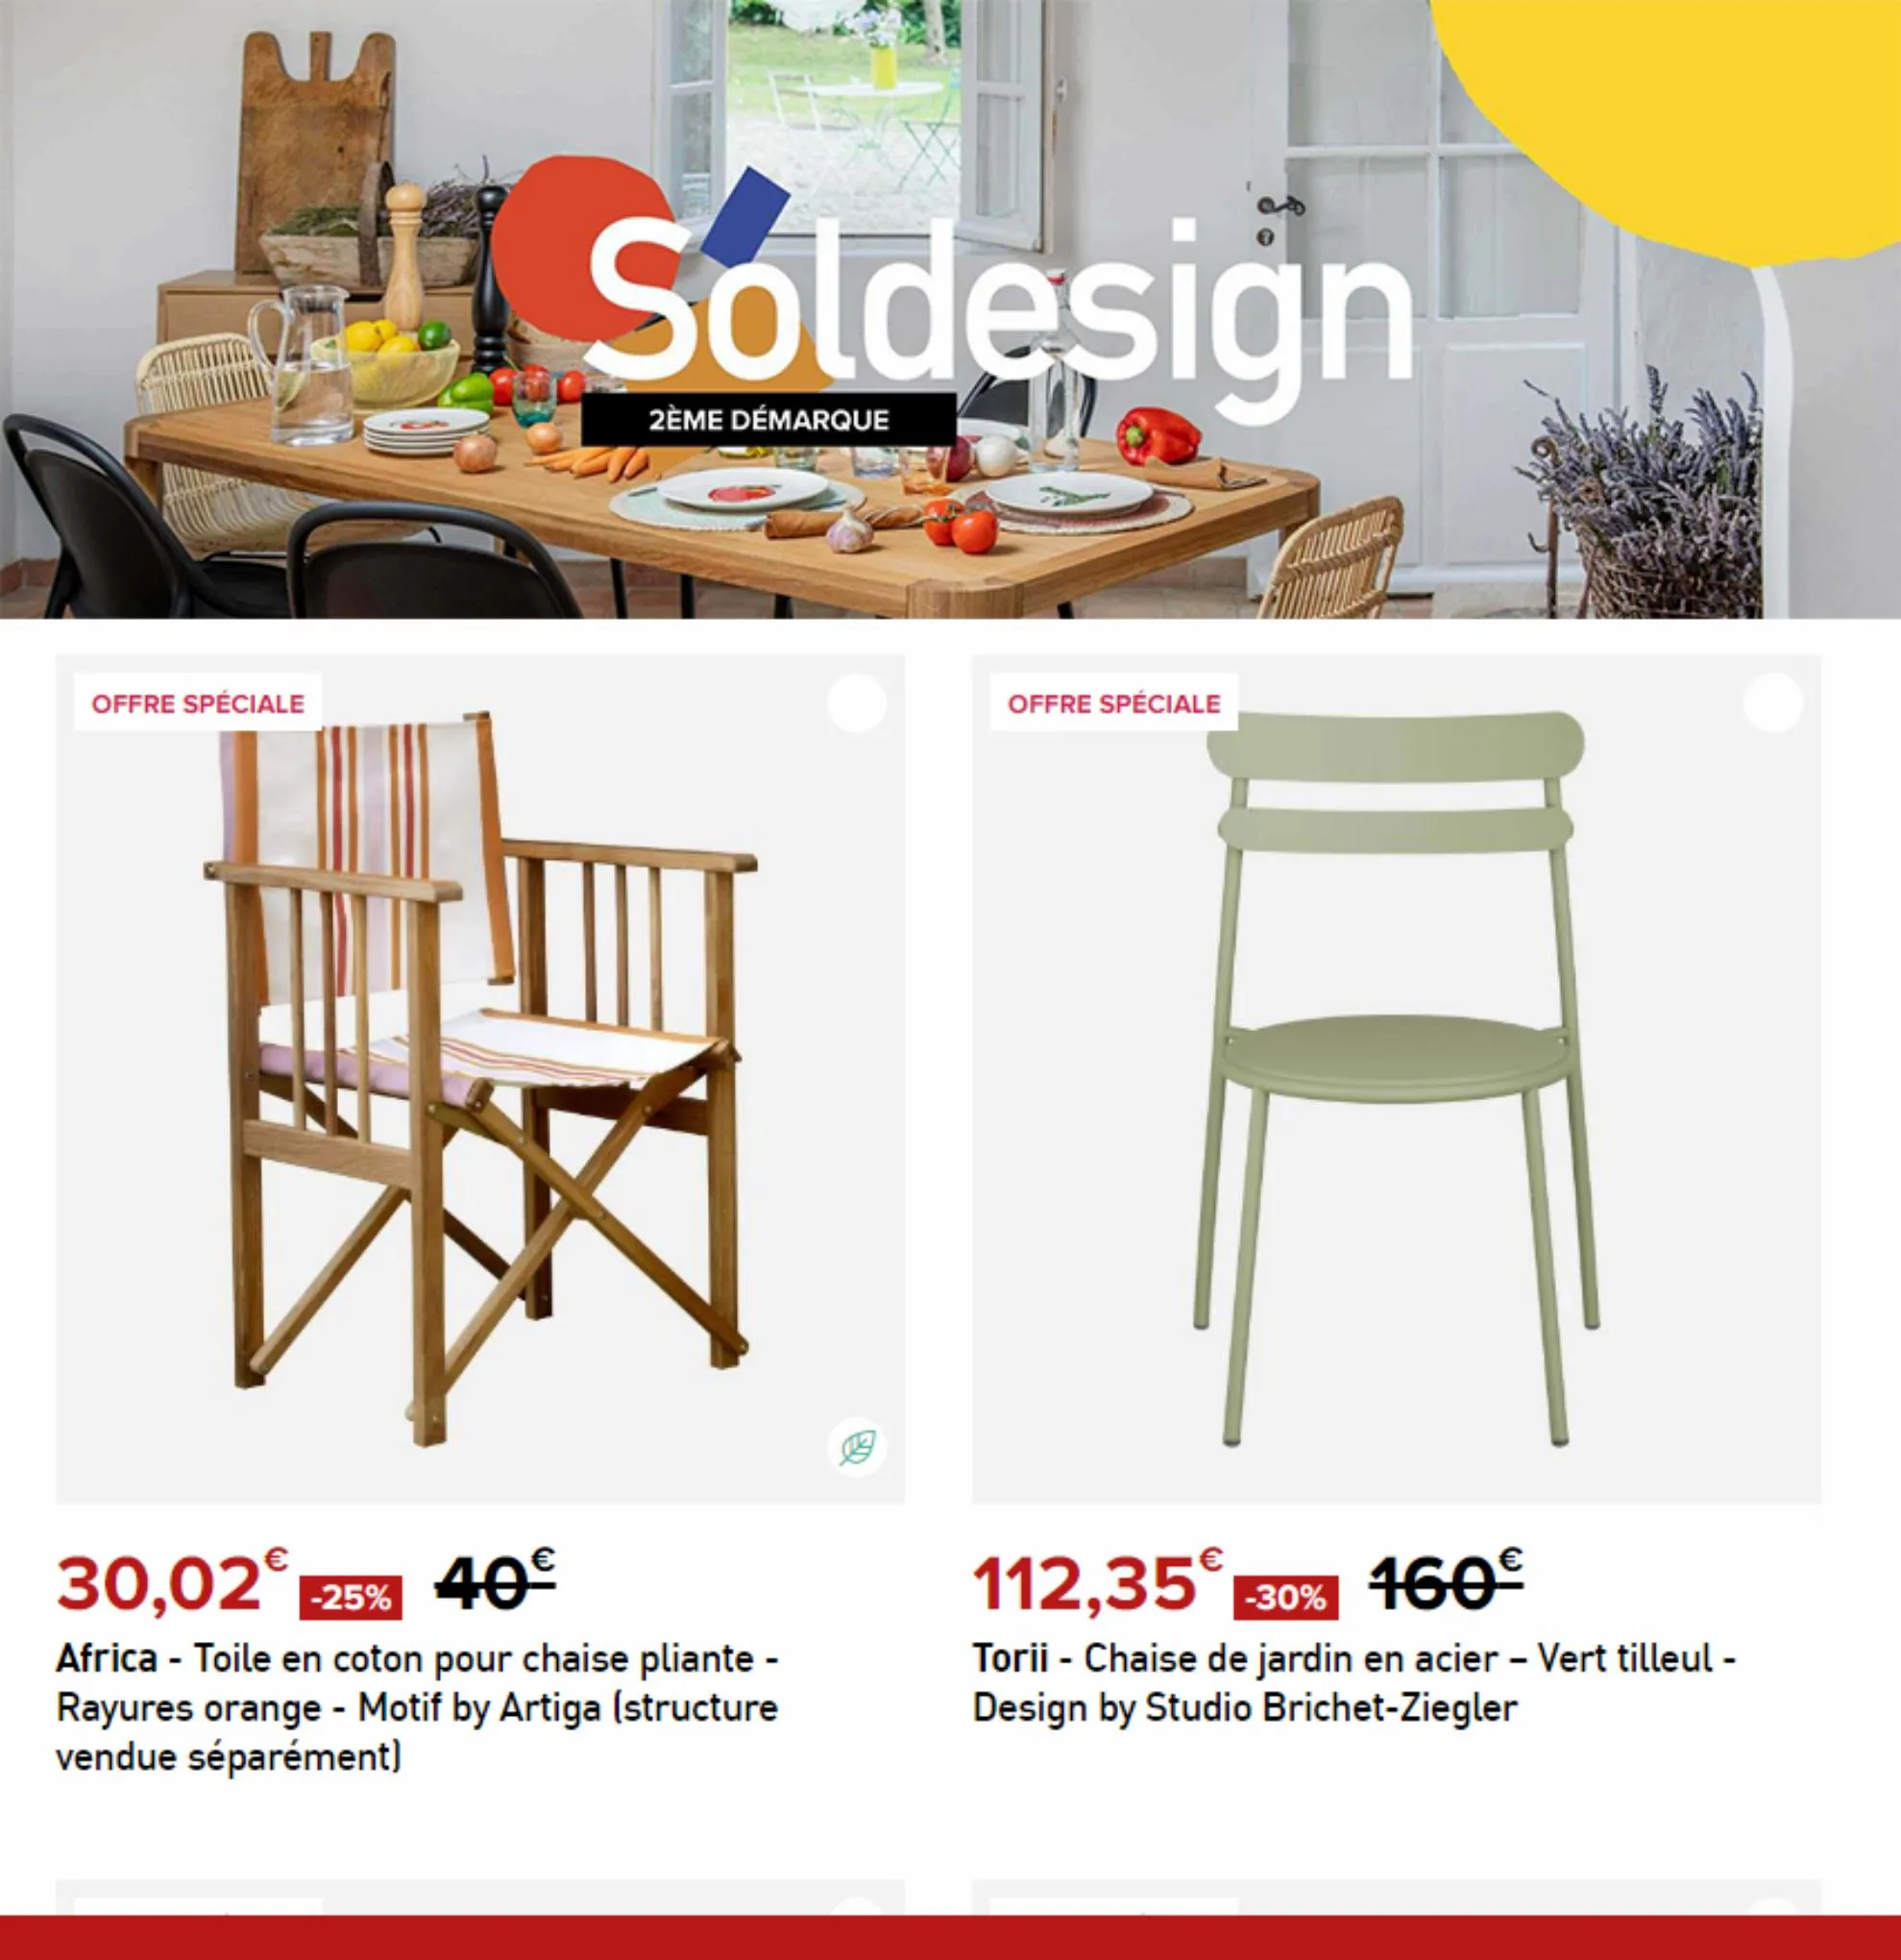 Catalogue Soldesign!, page 00003